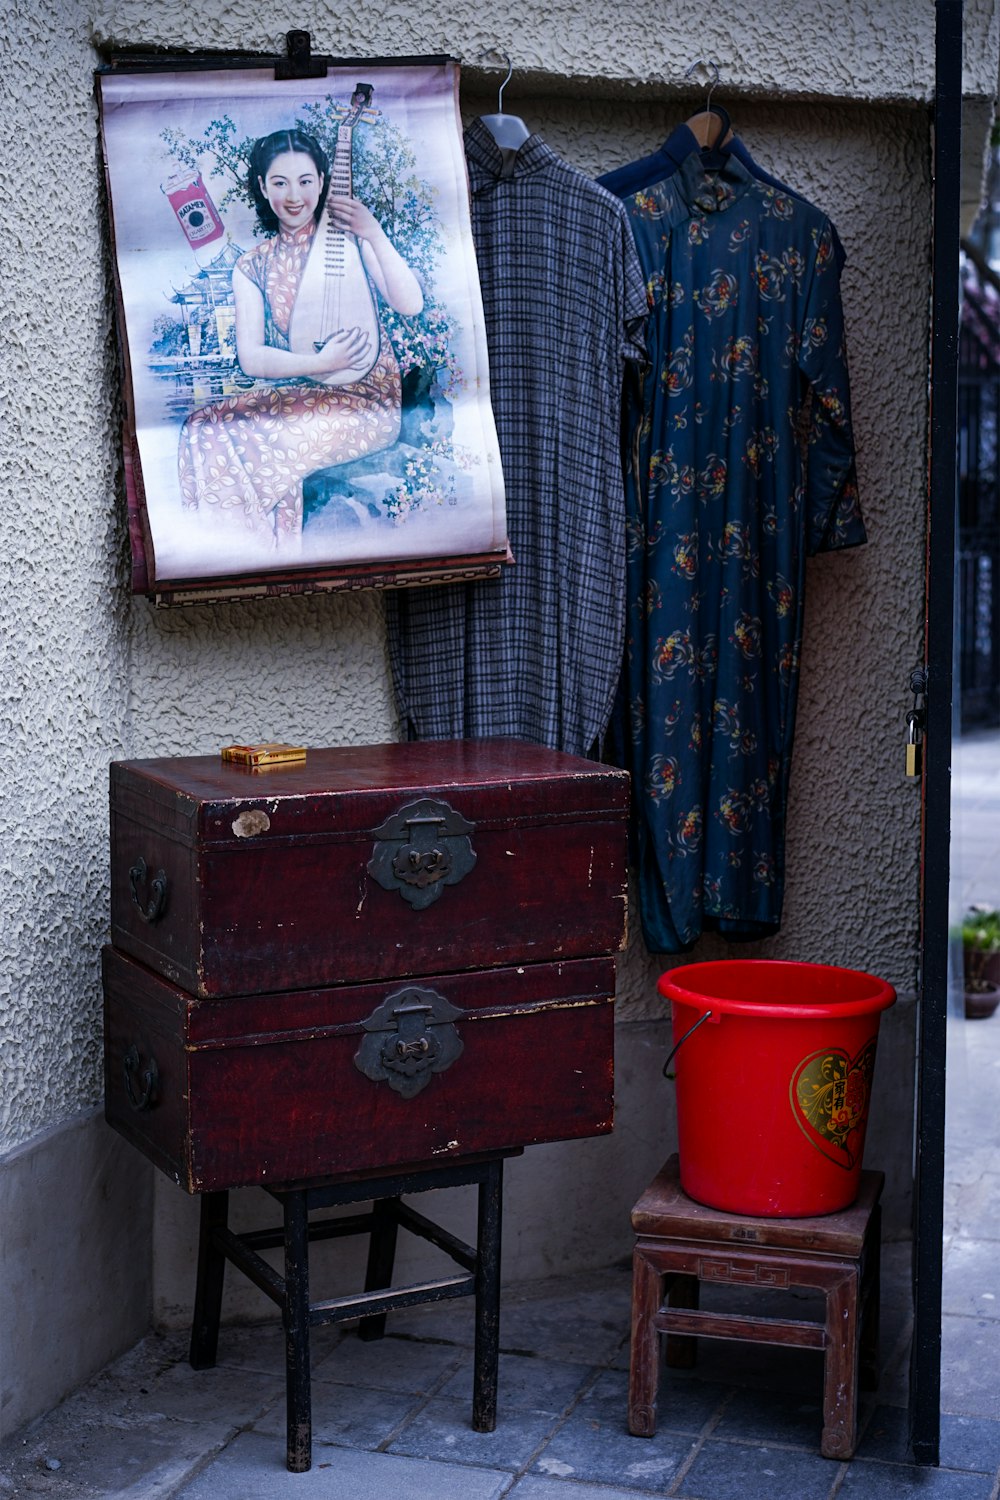 a picture of a woman hanging on a wall next to a chest of drawers